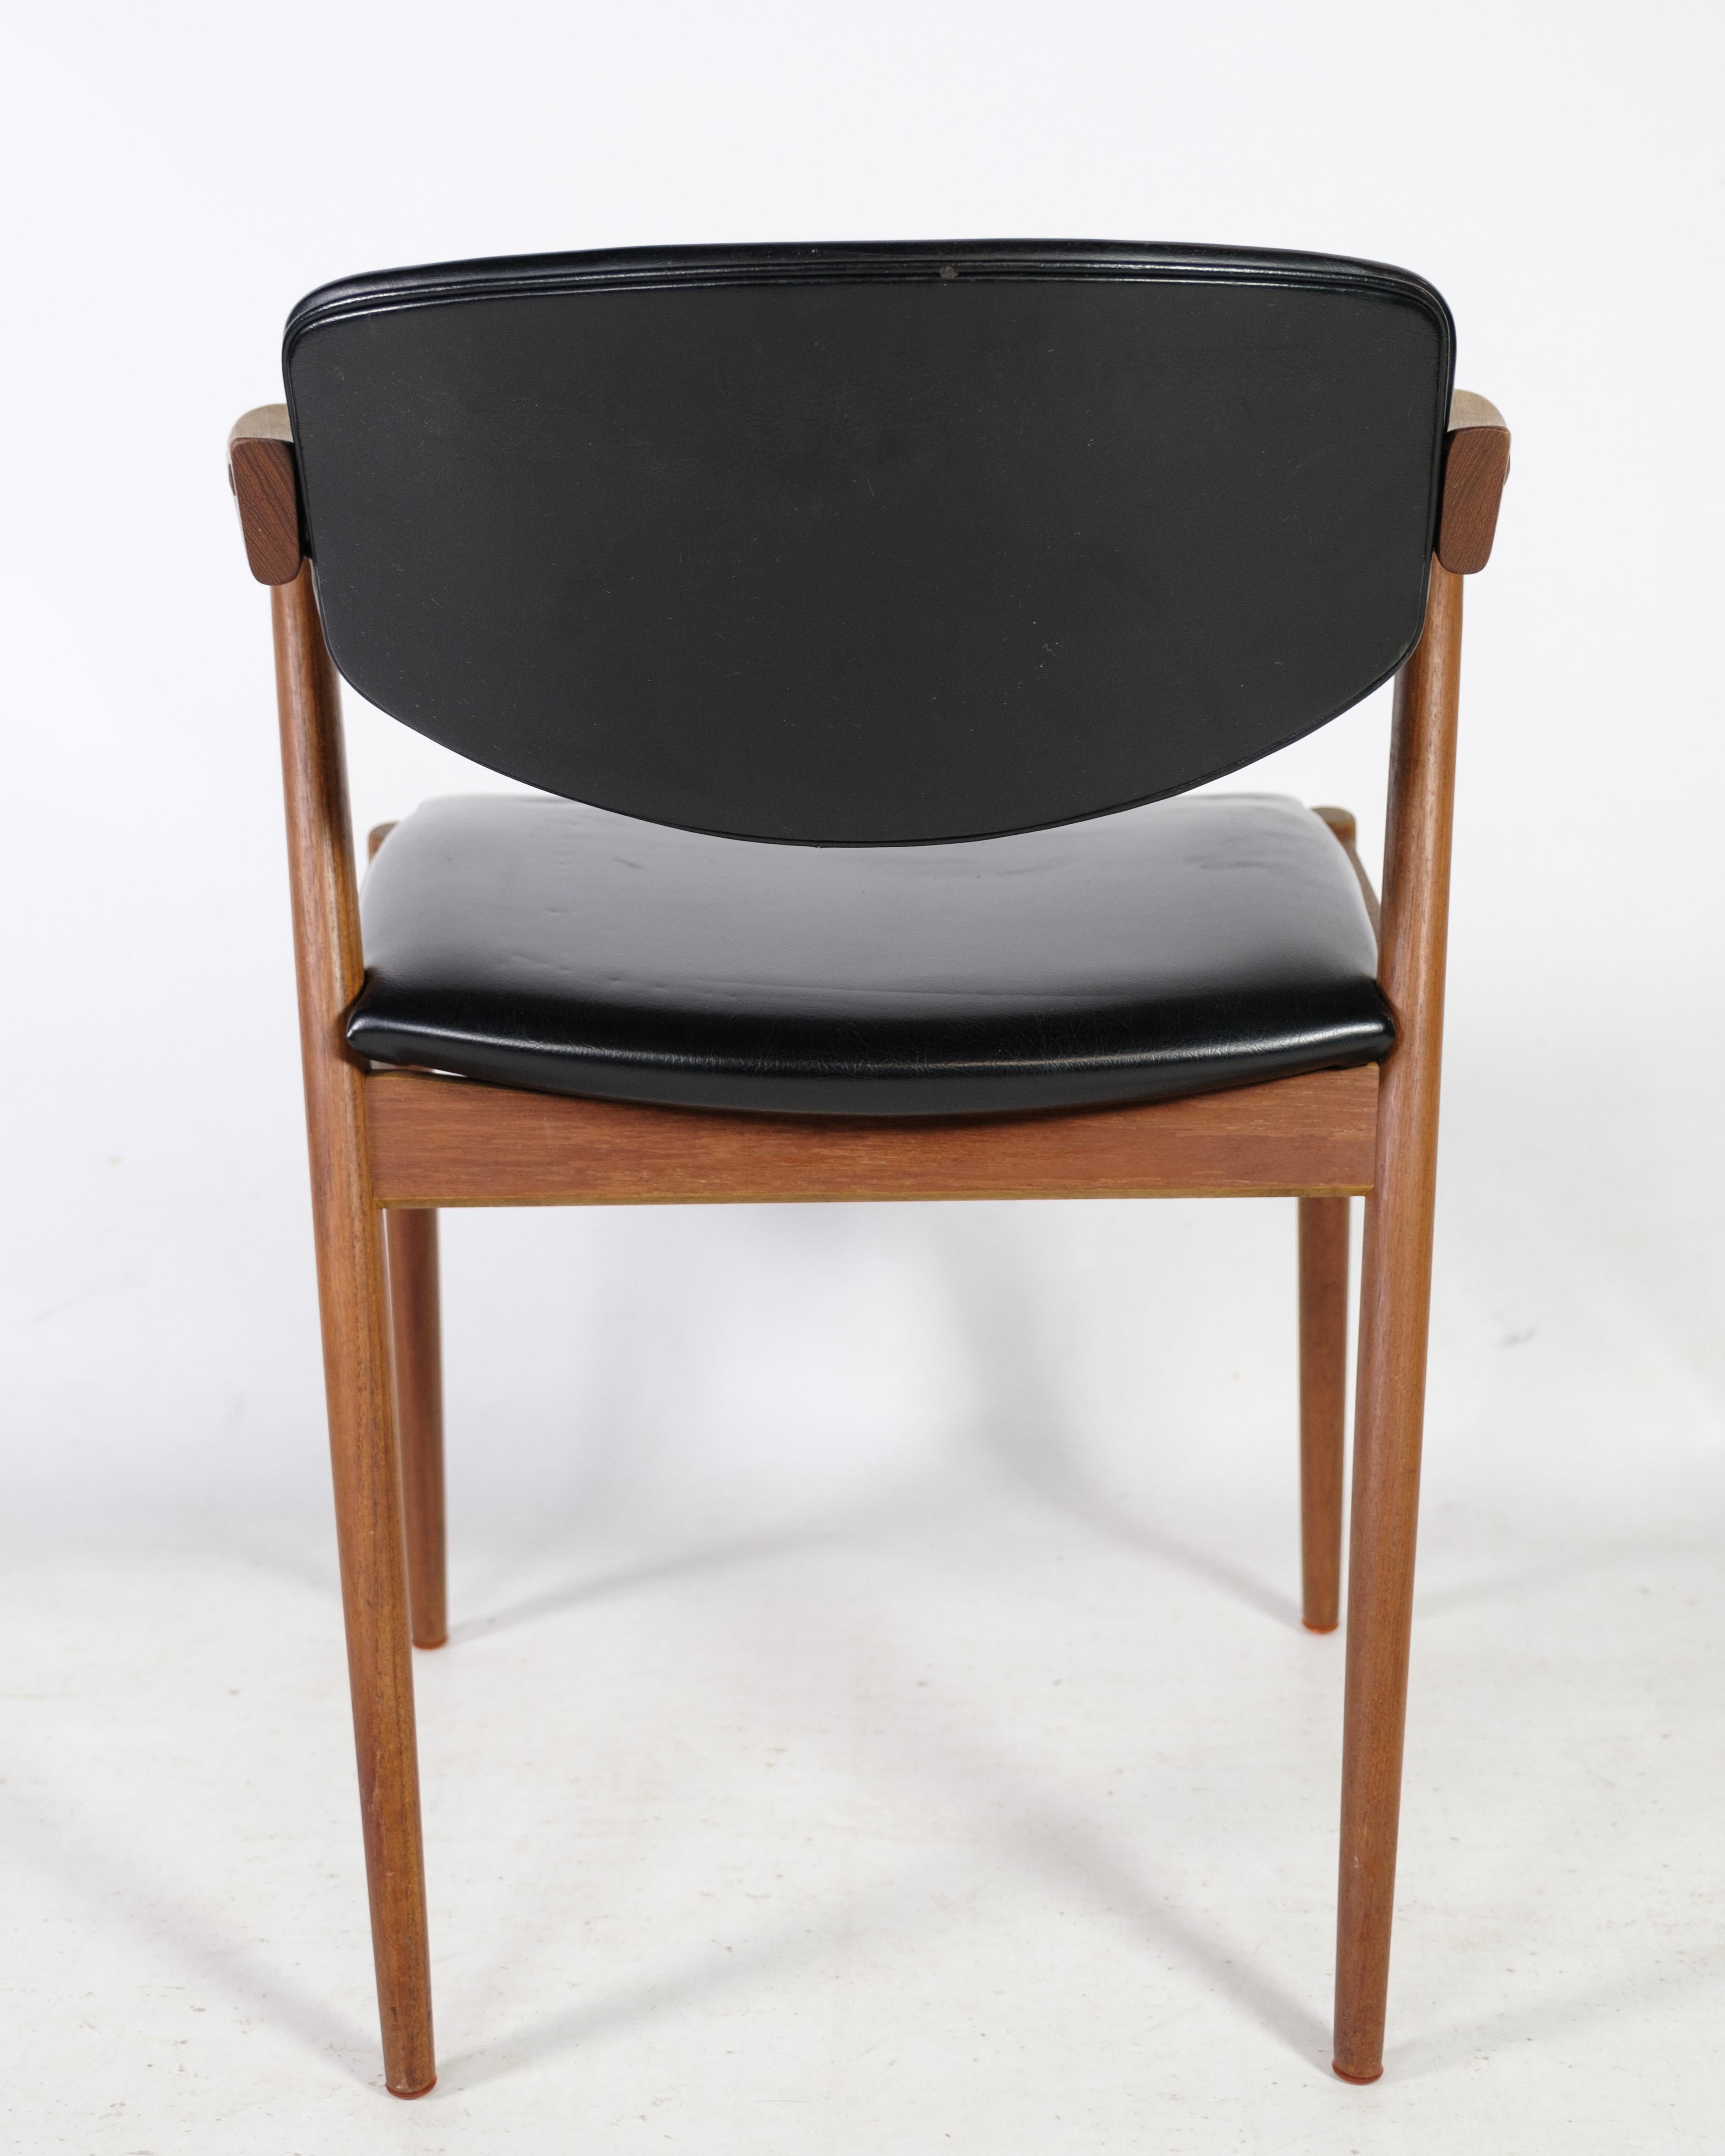 Set of Six Dining Room Chairs, Model 42, Designed by Kai Kristiansen 1